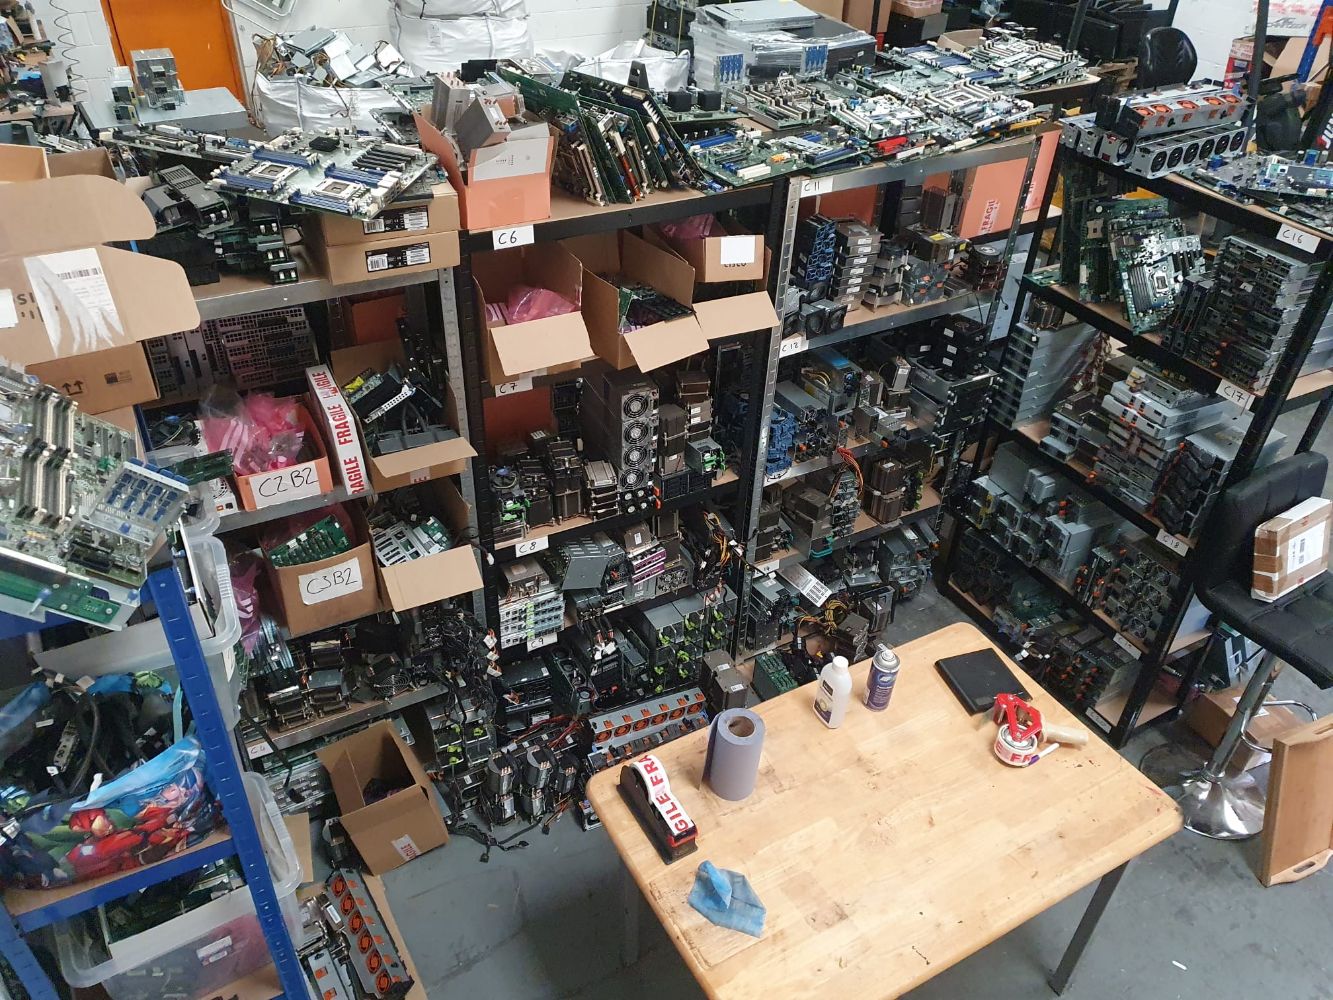 ONE LOT SALE | IT Hardware & Component Stock | Includes: PSU's, Graphic Cards, Motherboards, Processors & More | £90k+ Total Listing Price